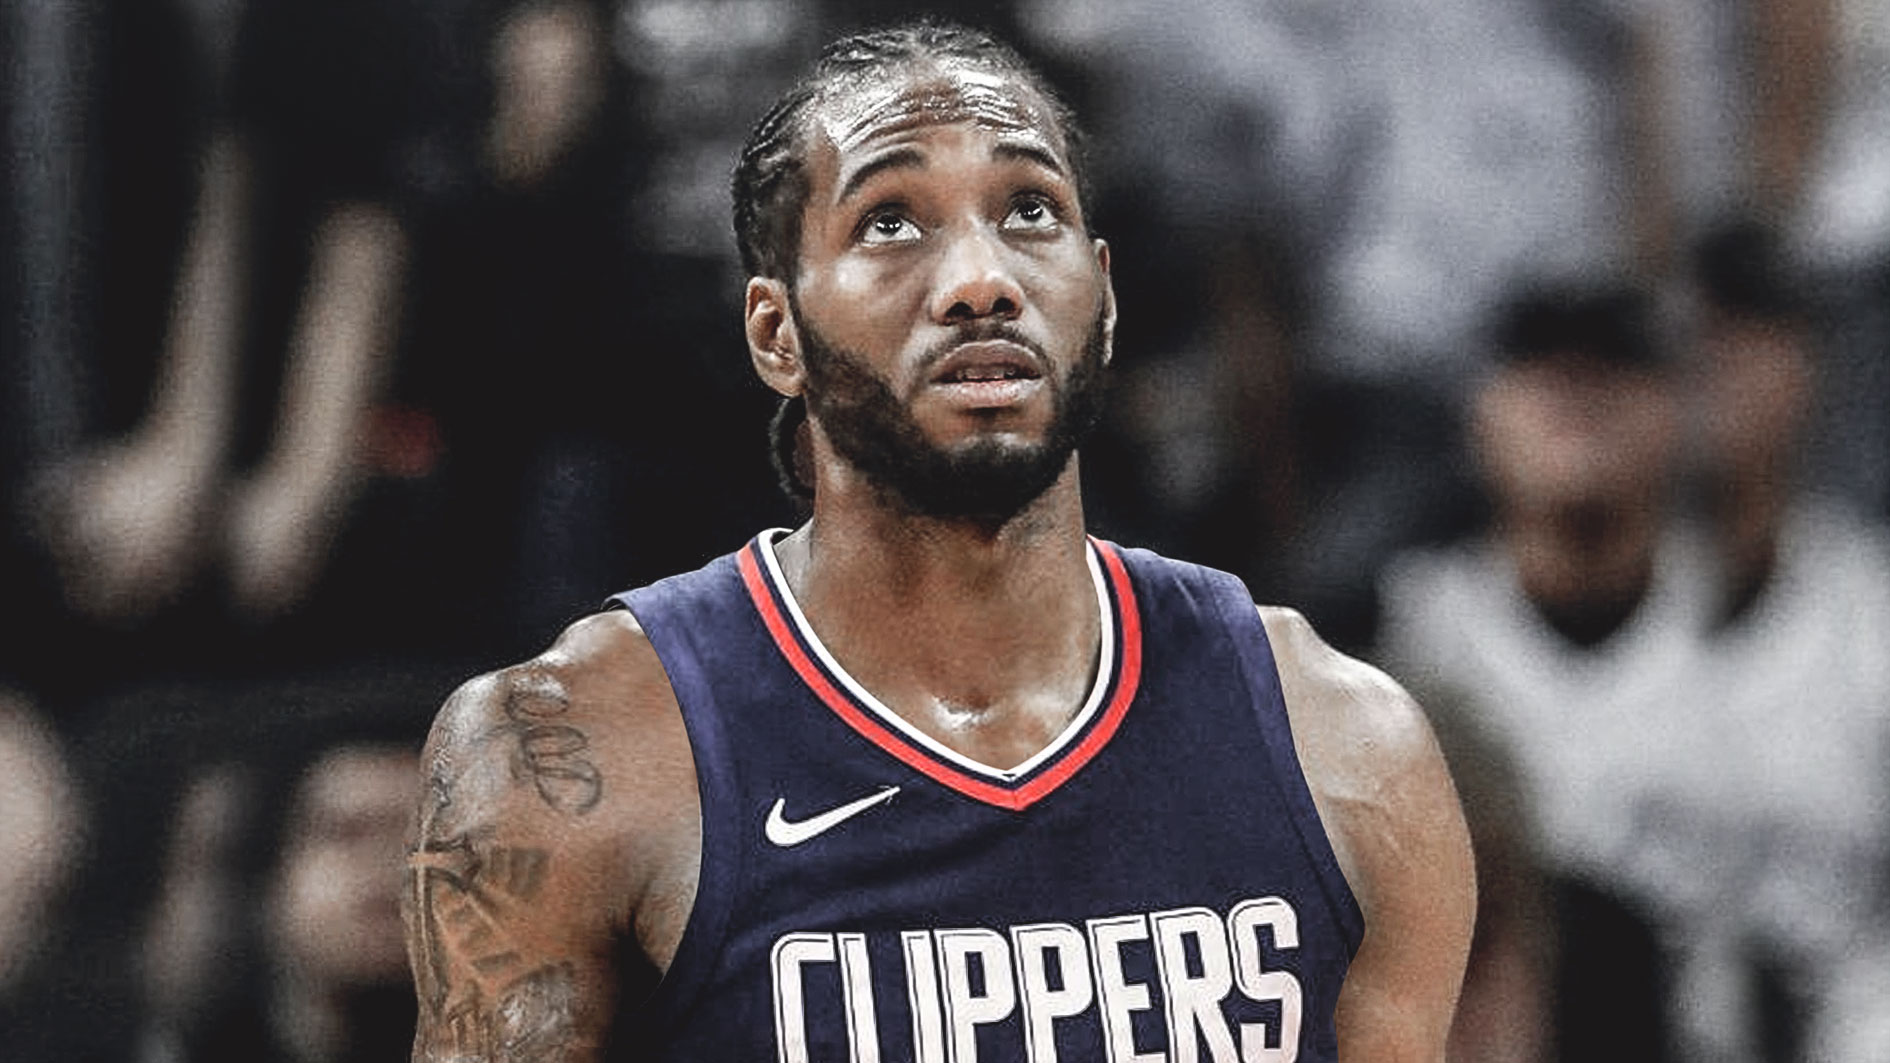 NBA Trade News: Kawhi Leonard Clippers Deal Was Planned back in 2017